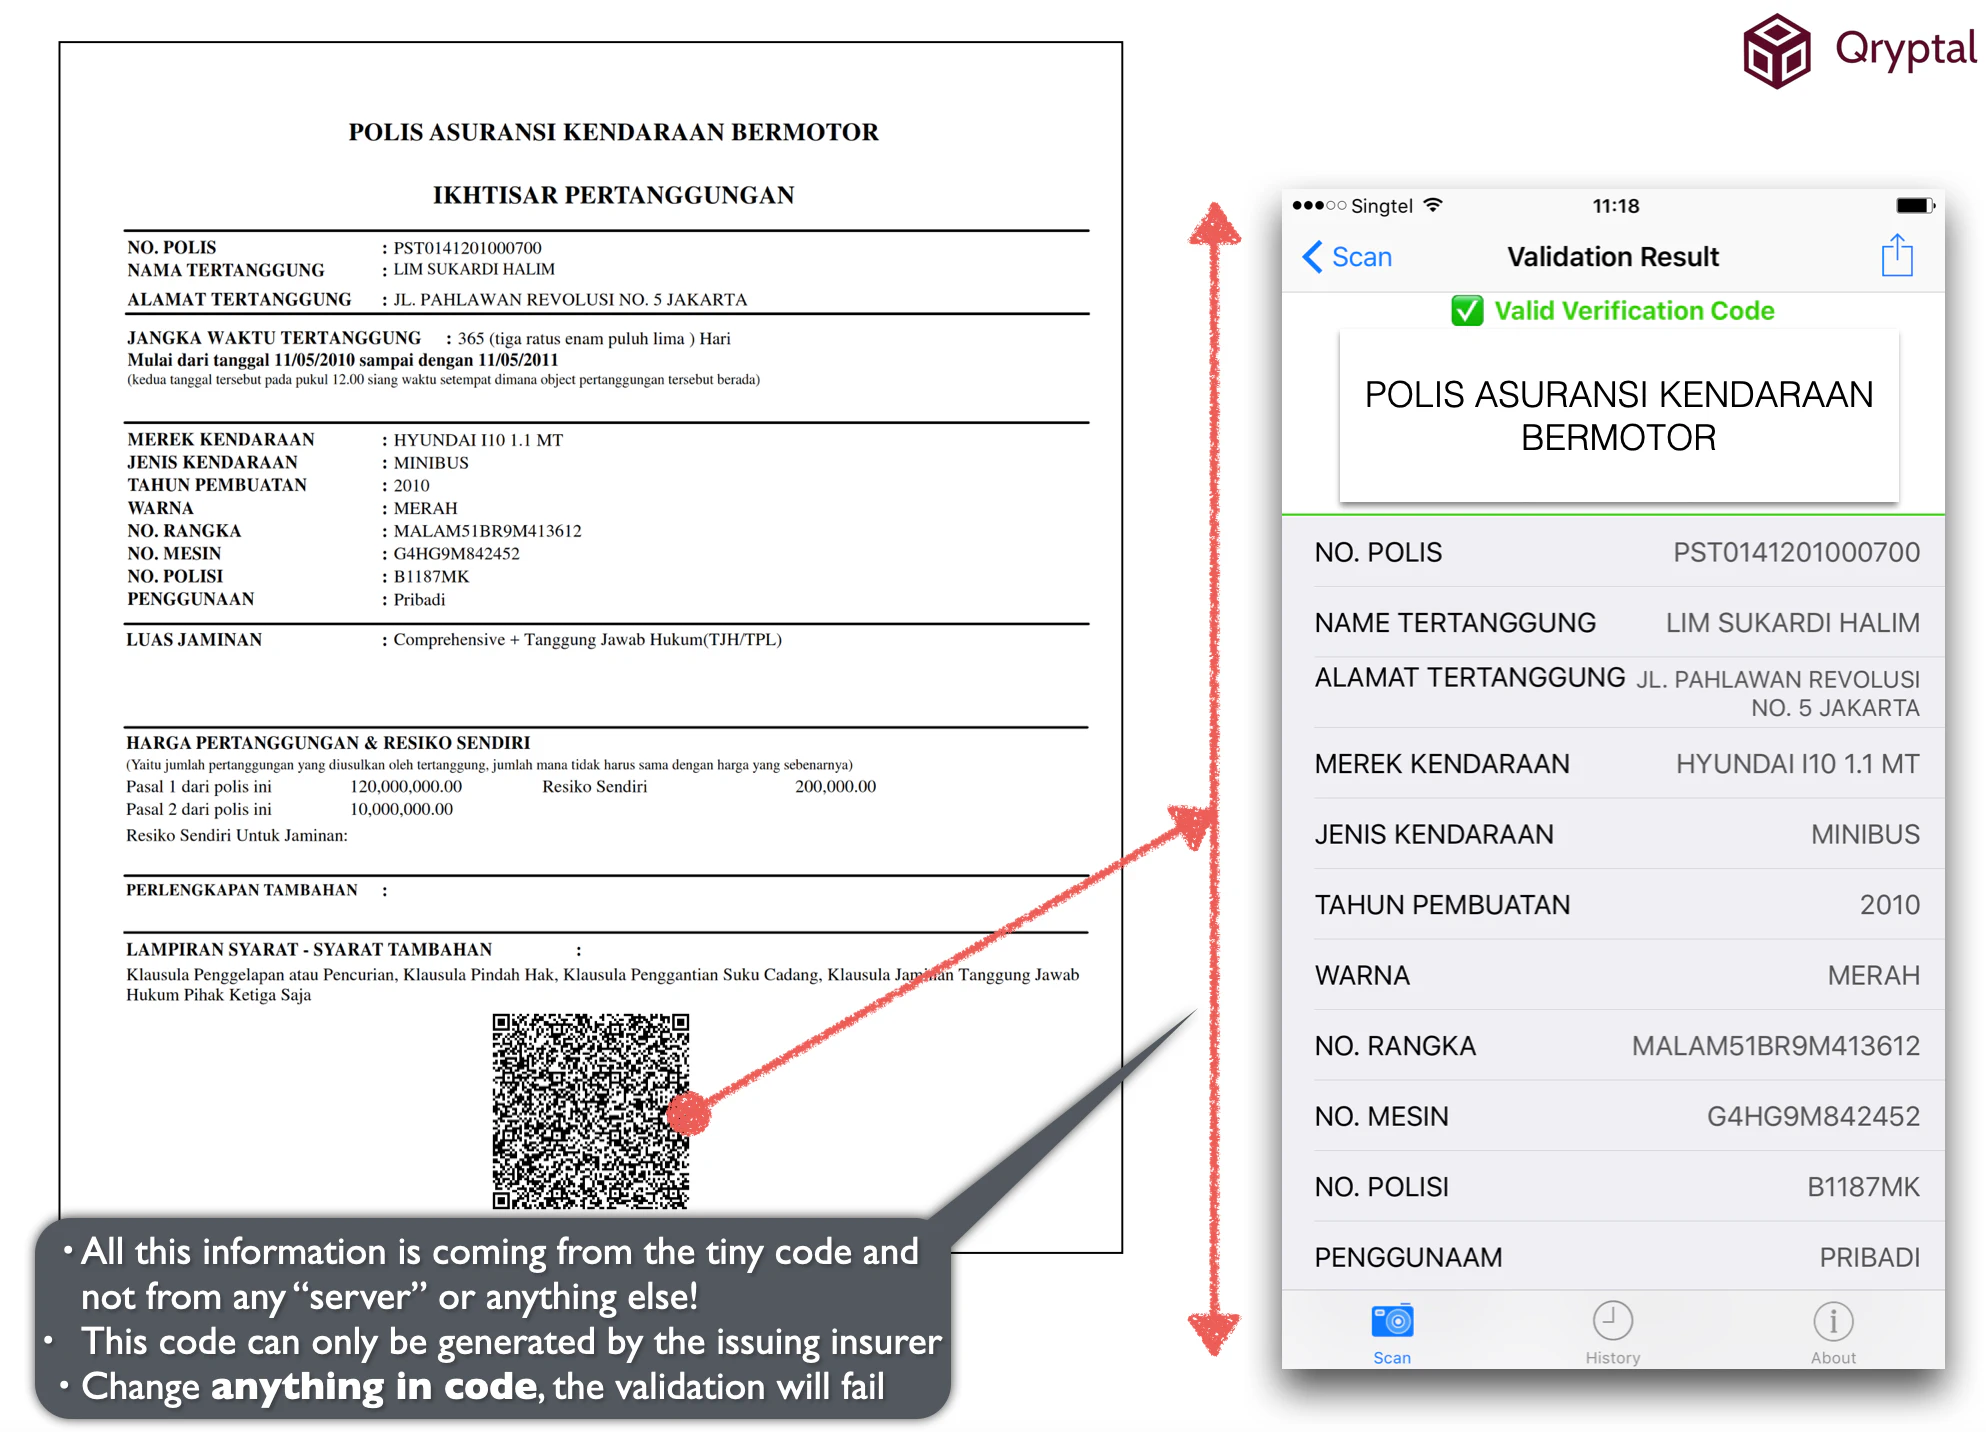 Sample Insurance Policy with secure QR code